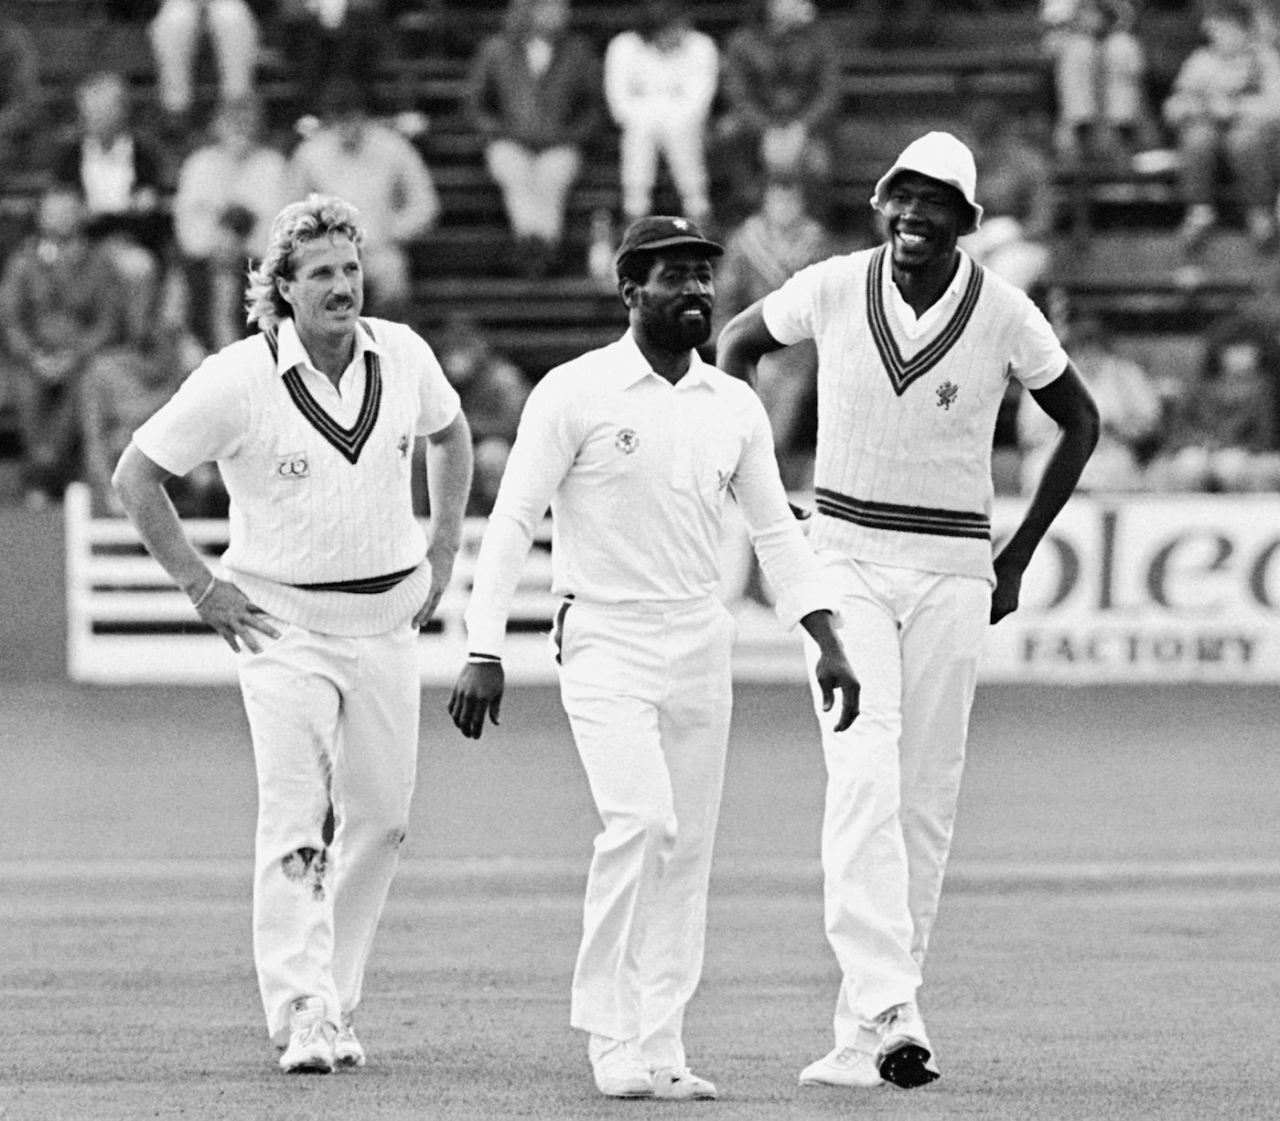 Ian Botham, Viv Richards and Joel Garner,on their last appearance together for Somerset, County cricket ground, Taunton, Somerset, 